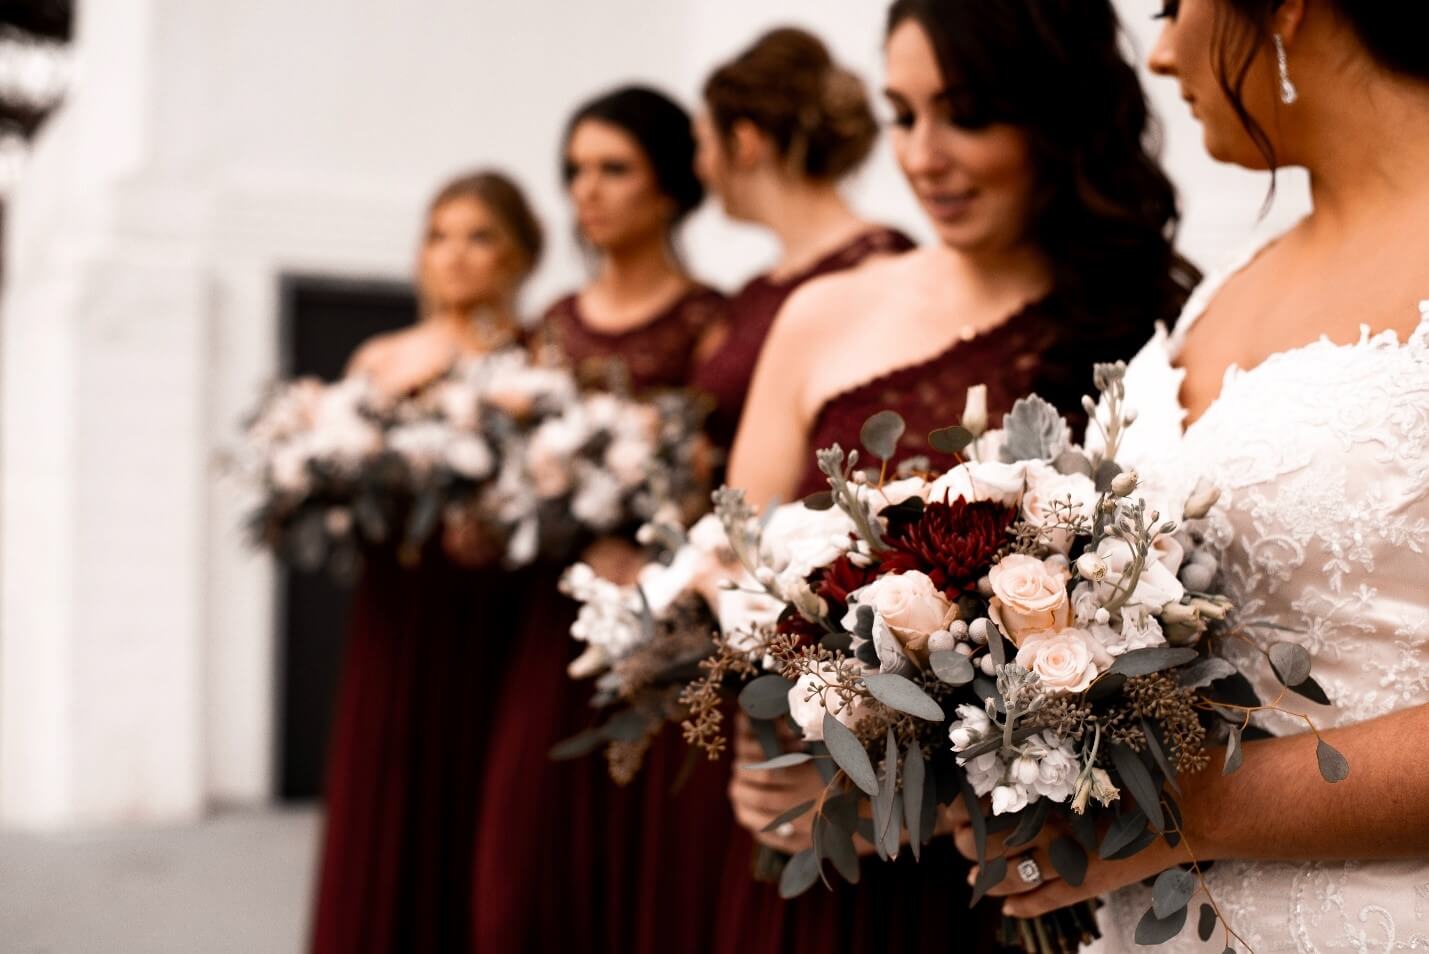 Bridesmaids dressed up at the wedding, holding bouquets